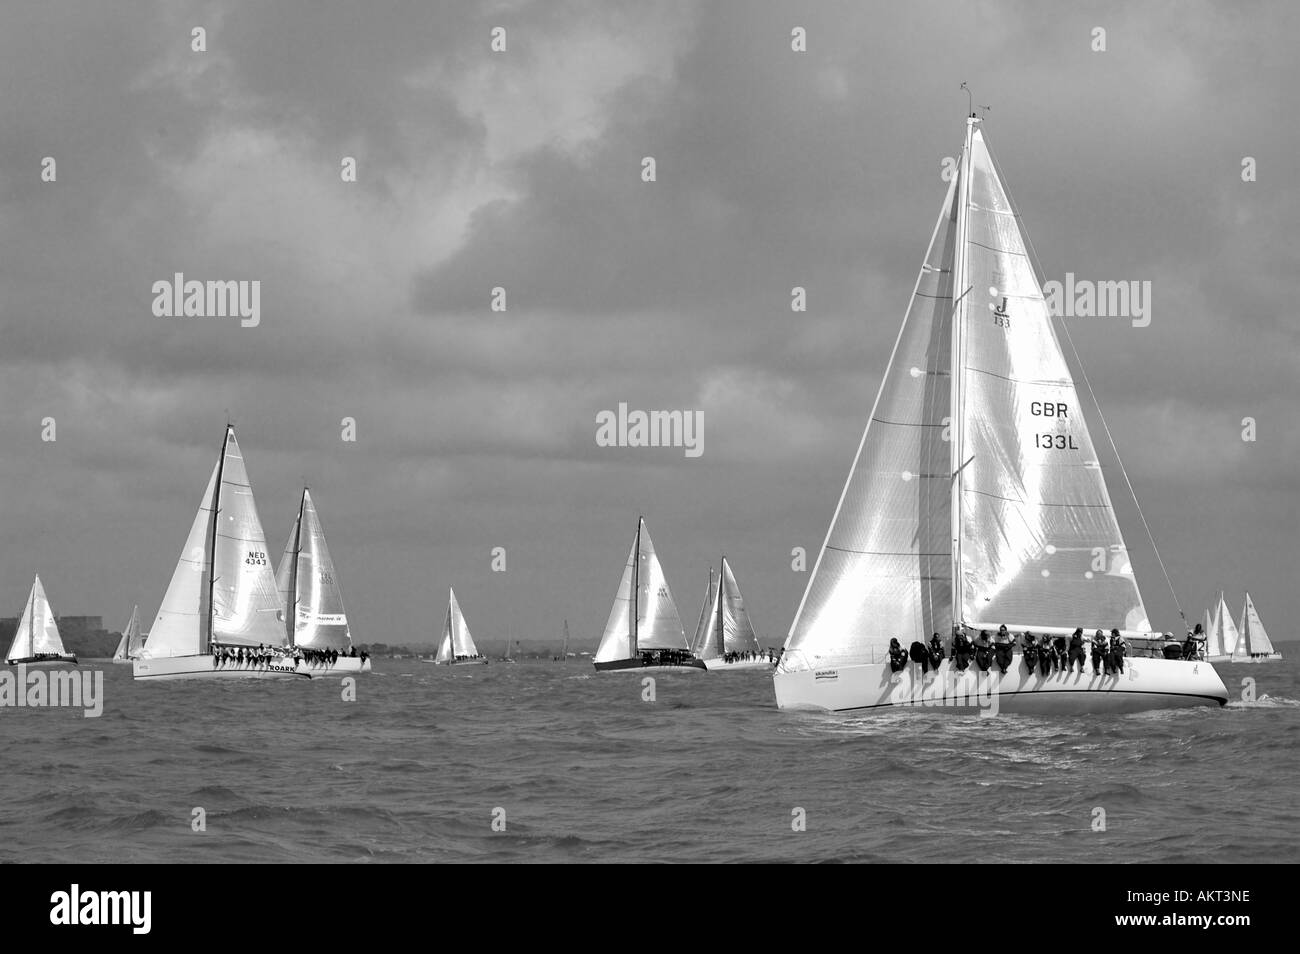 Cowes Week Racing, Cowes, Isle of Wight, England, UK, GB. Stock Photo